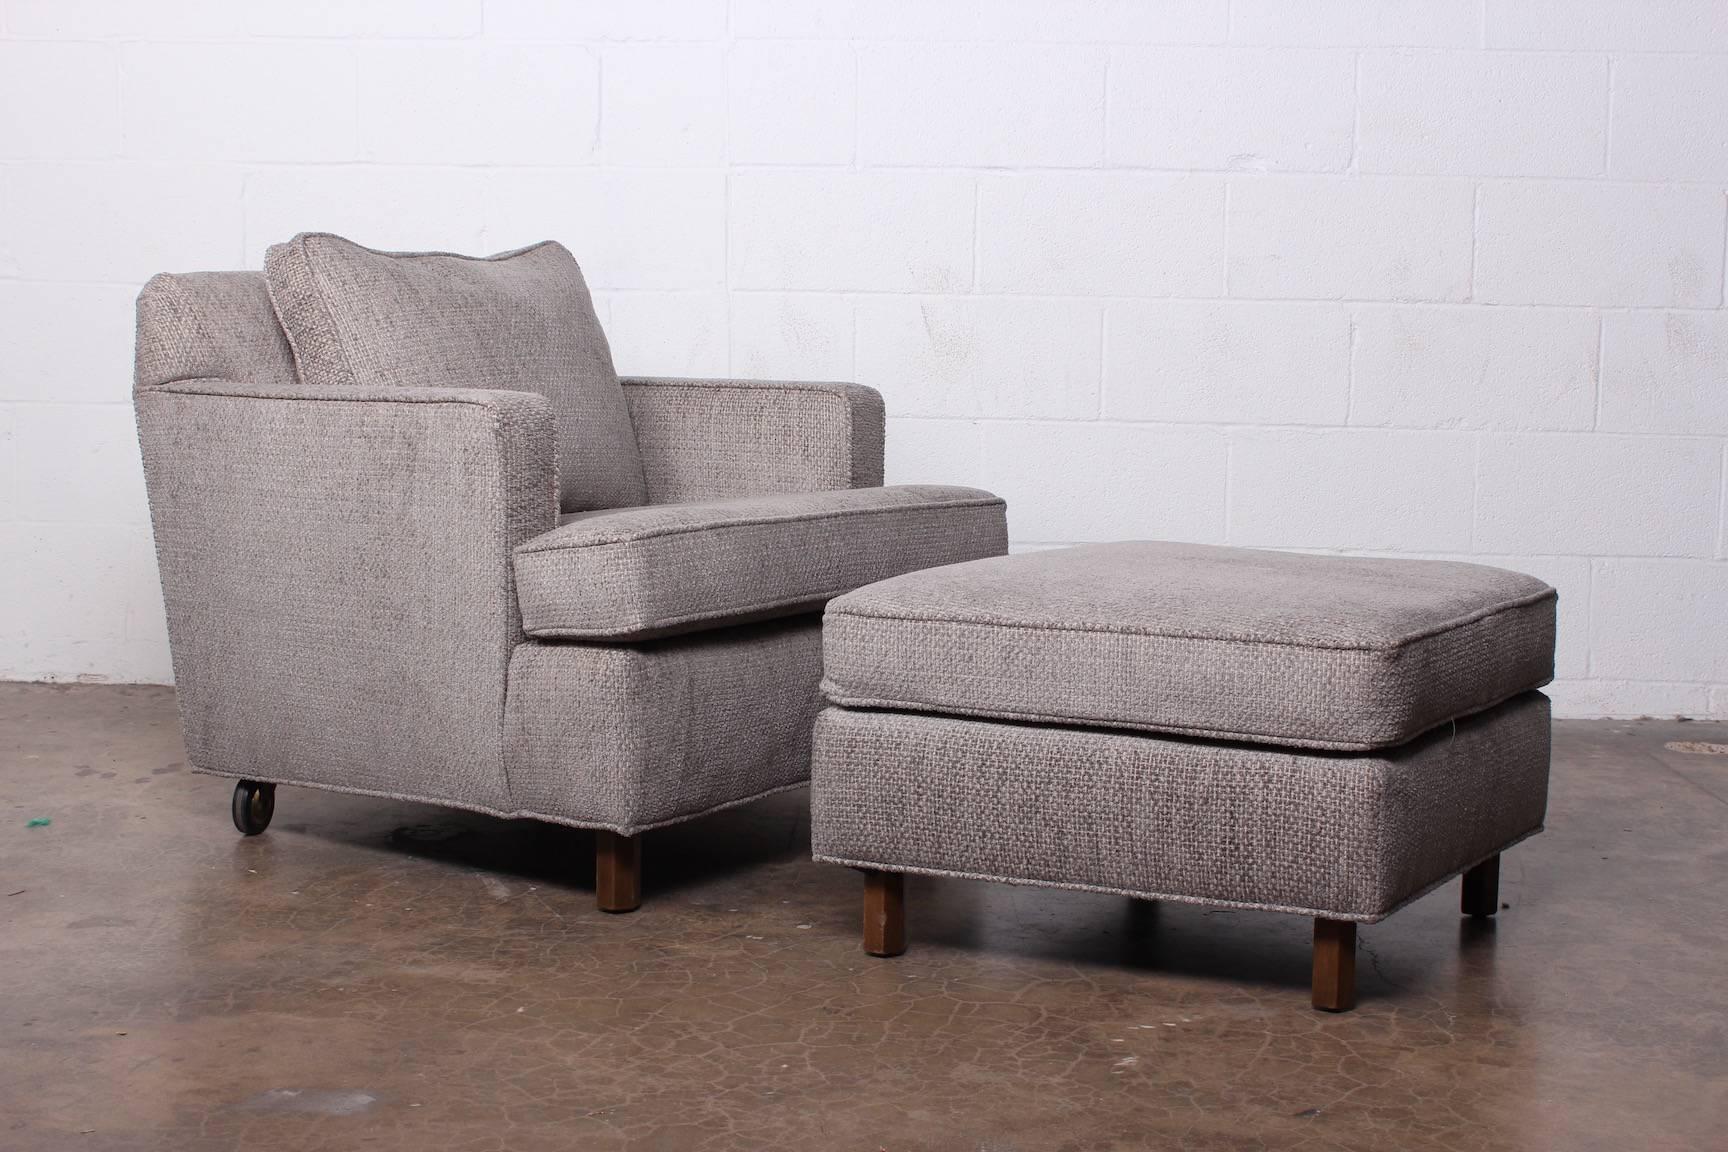 Lounge Chair and Ottoman by Edward Wormley for Dunbar 1